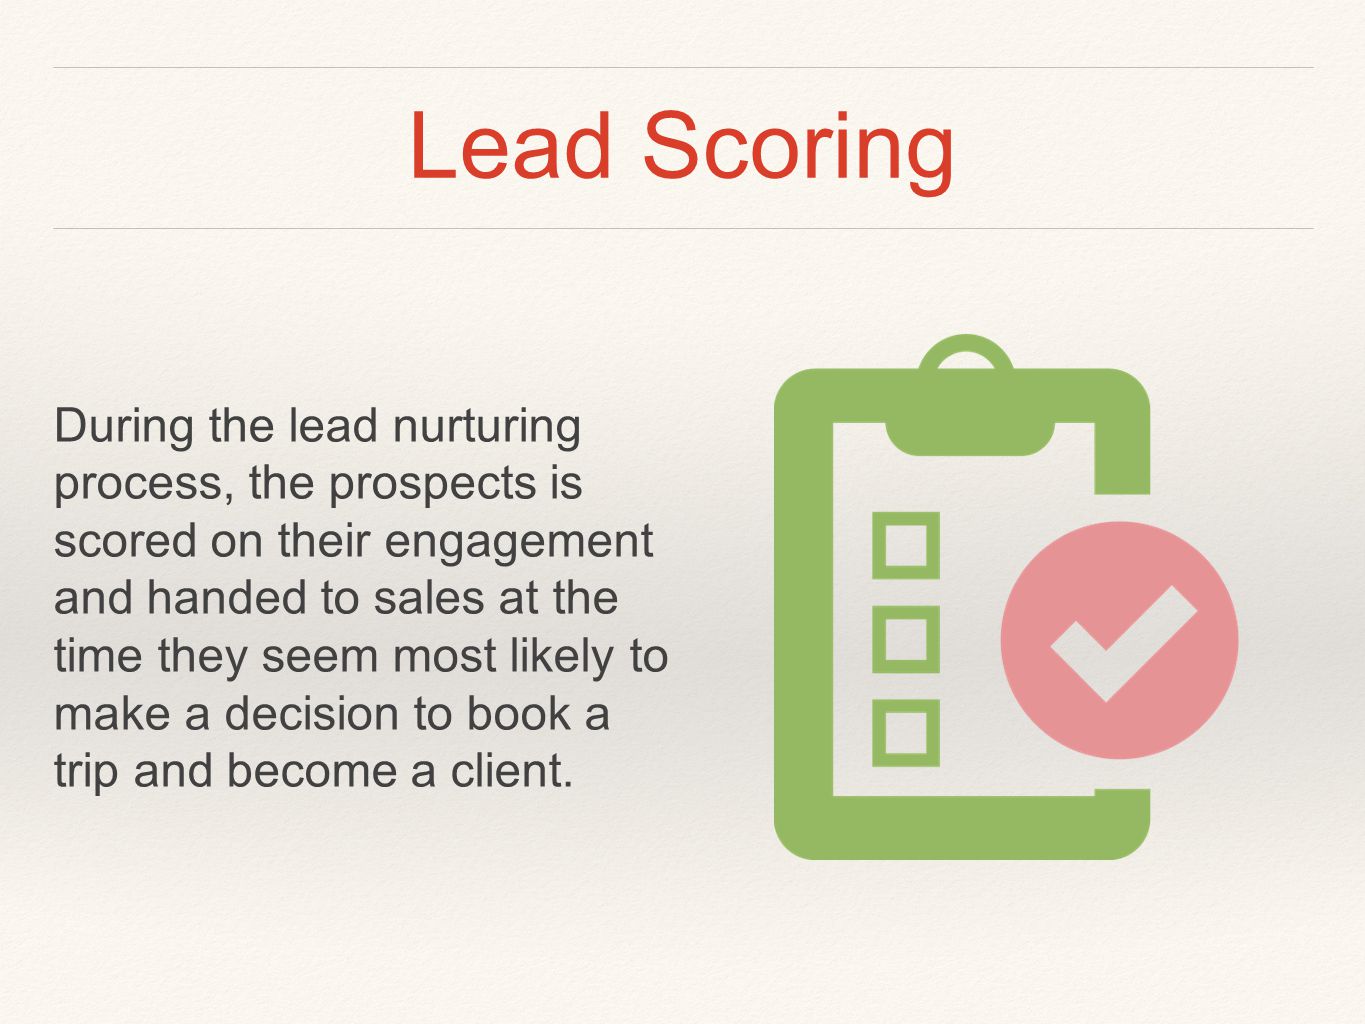 Lead Scoring During the lead nurturing process, the prospects is scored on their engagement and handed to sales at the time they seem most likely to make a decision to book a trip and become a client.